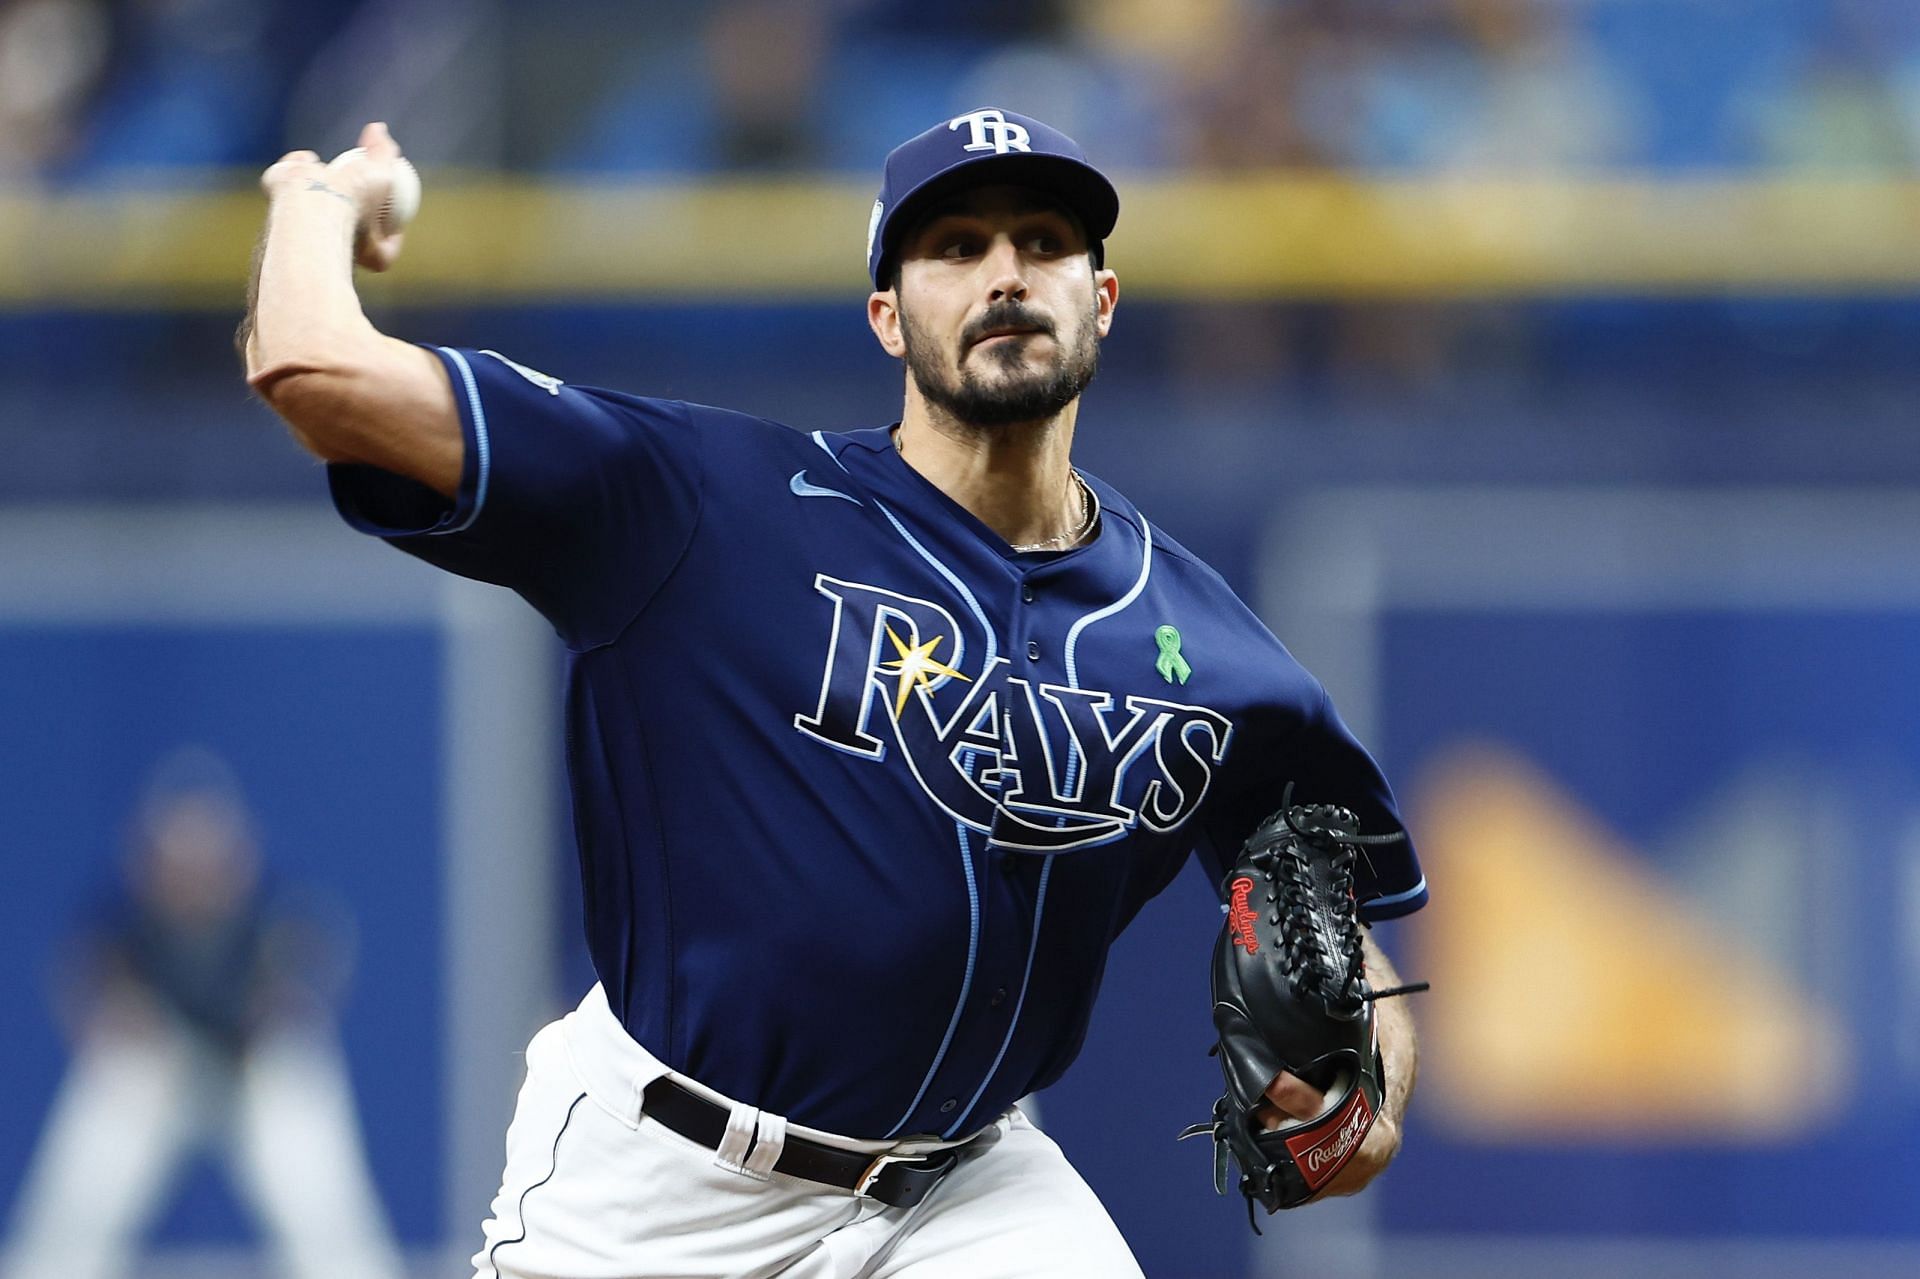 Zach Eflin #24 of the Tampa Bay Rays throws a pitch during the first inning against the Pittsburgh Pirates at Tropicana Field